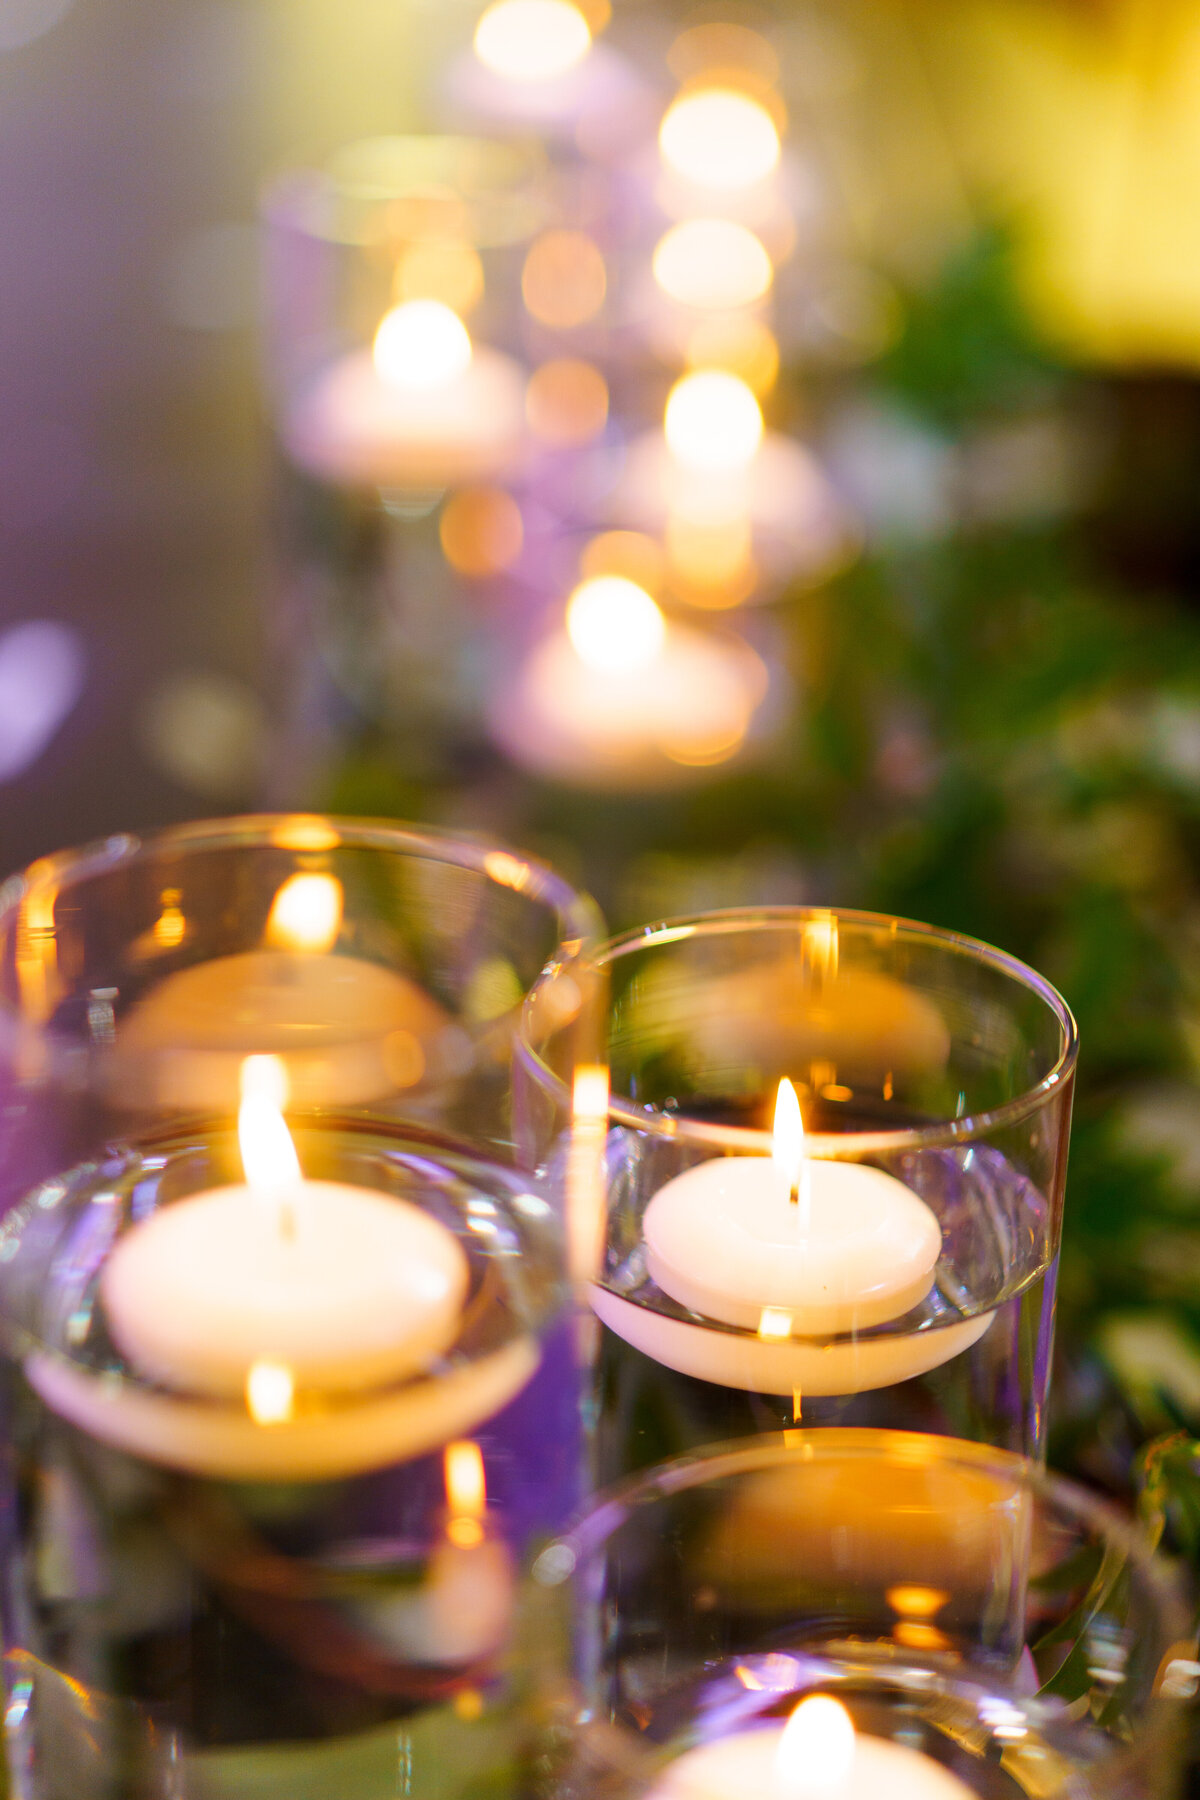 Floating candles amidst greenery and purple lighting at a wedding at 1883 Locale in Reynoldsburg, Ohio.